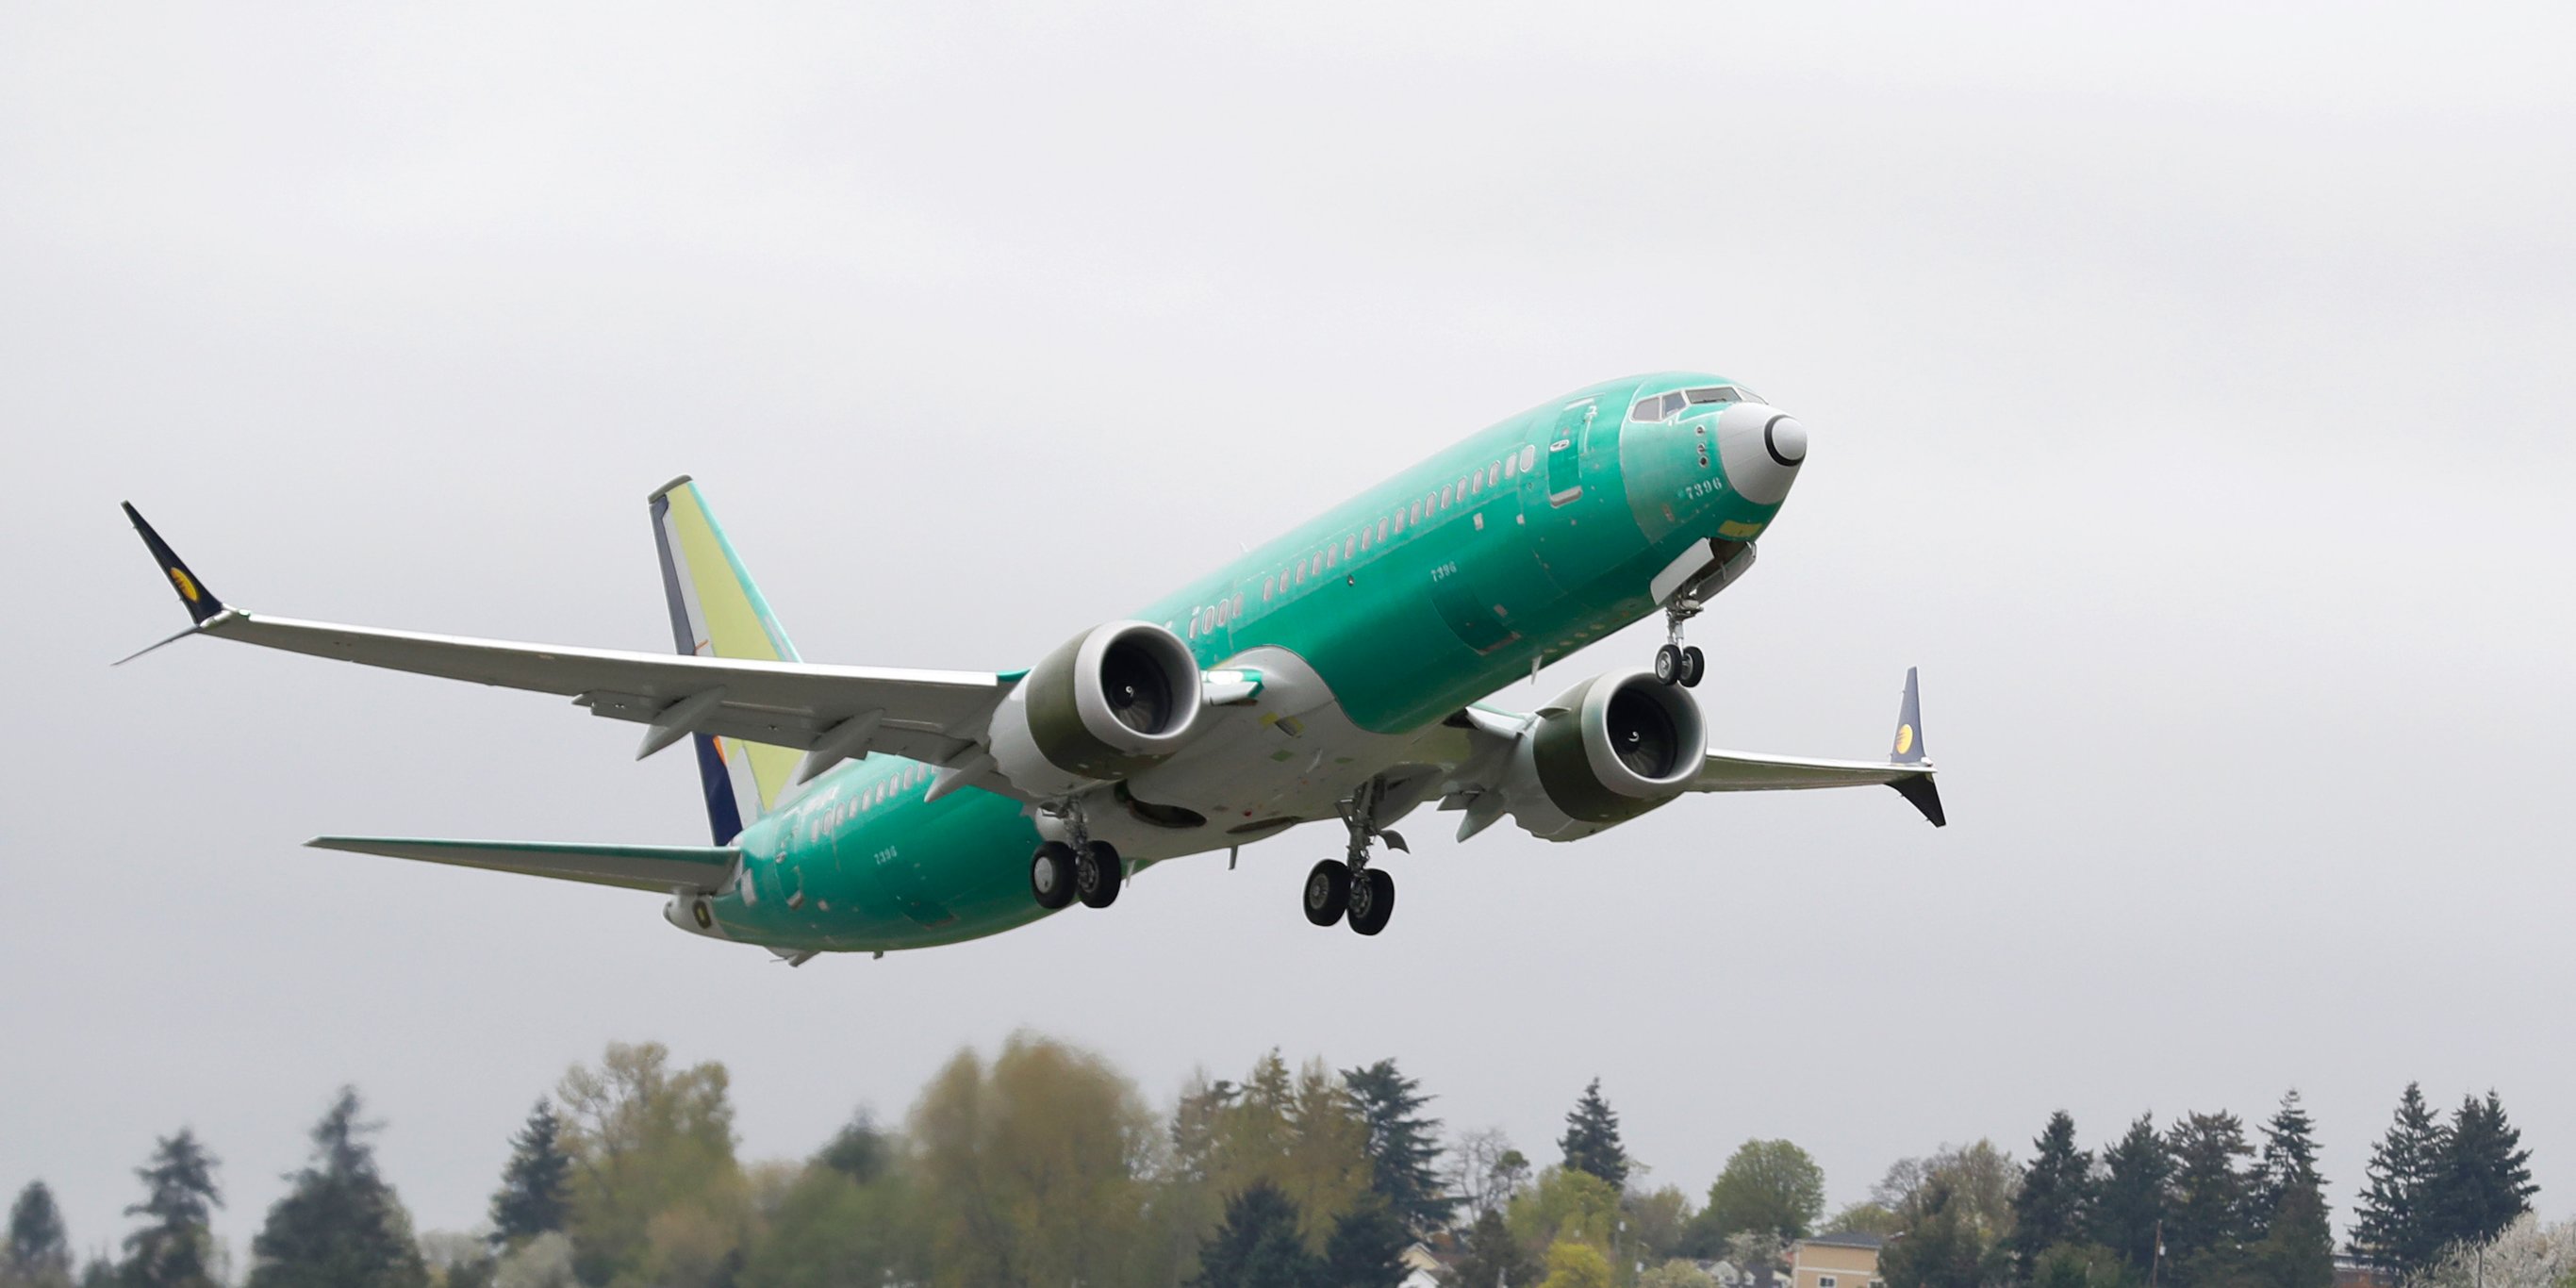 Boeing’s CEO explains why the company didn’t tell 737 Max pilots about the software system that contributed to 2 fatal crashes (BA)